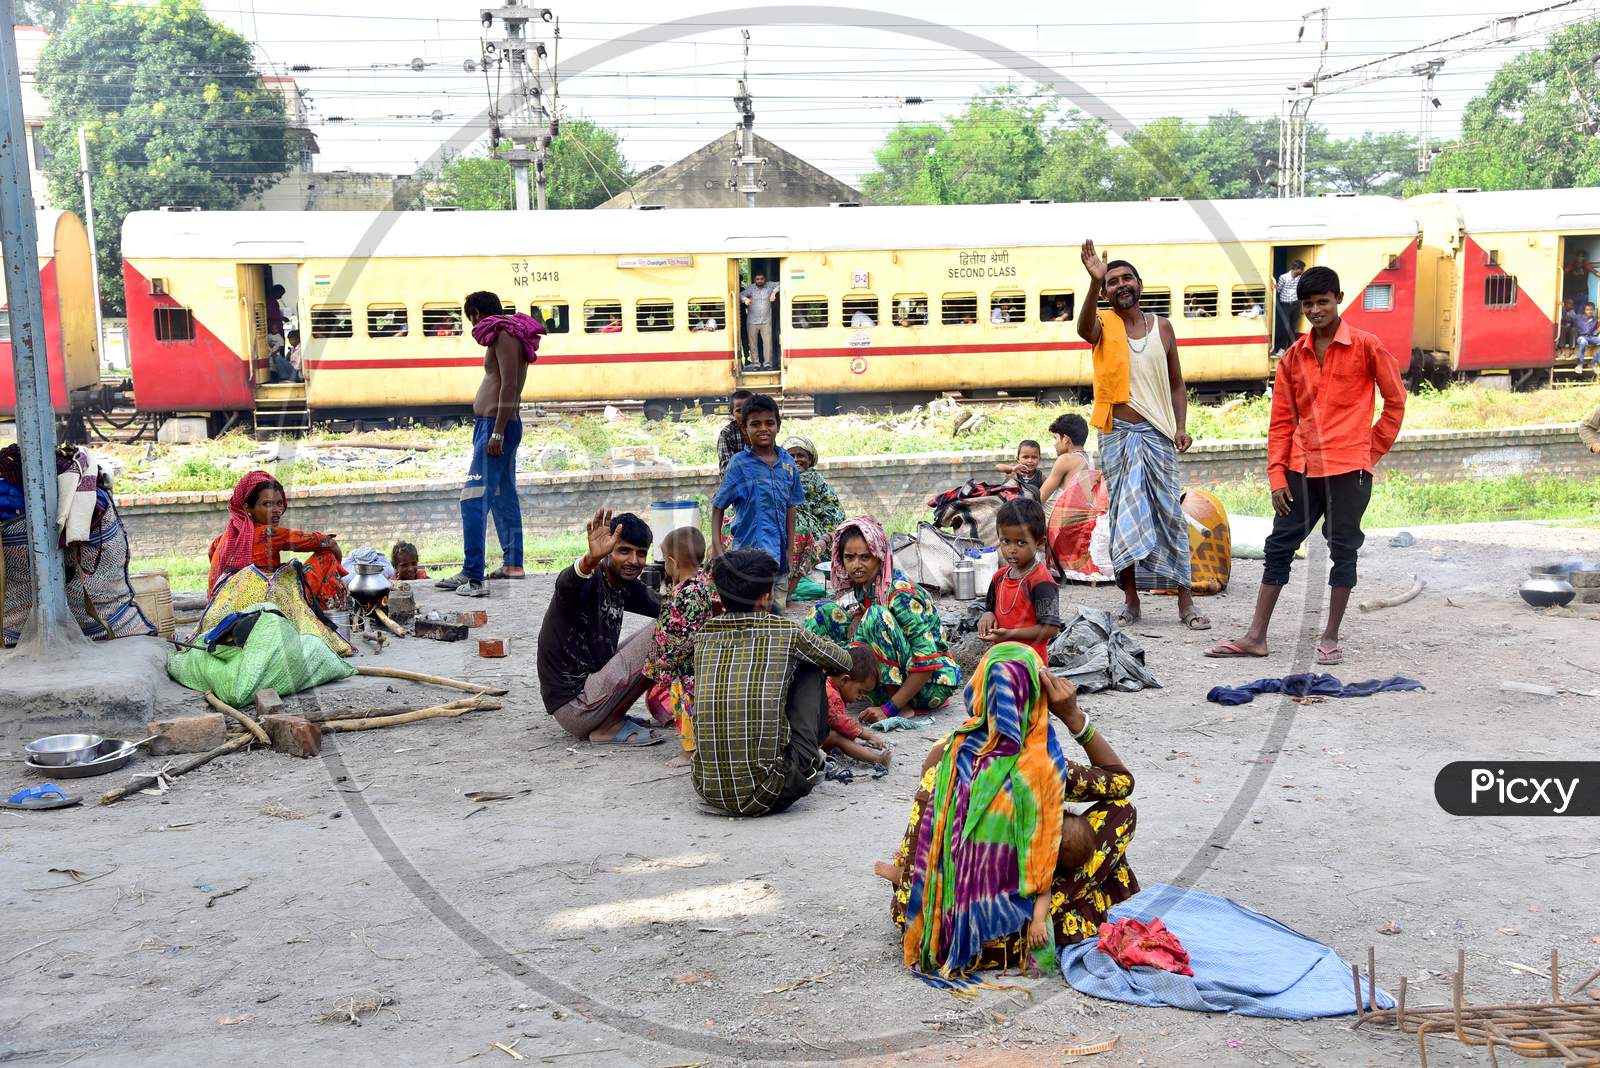 Rajasthani Migratory Families Living At Railway Station Compounds